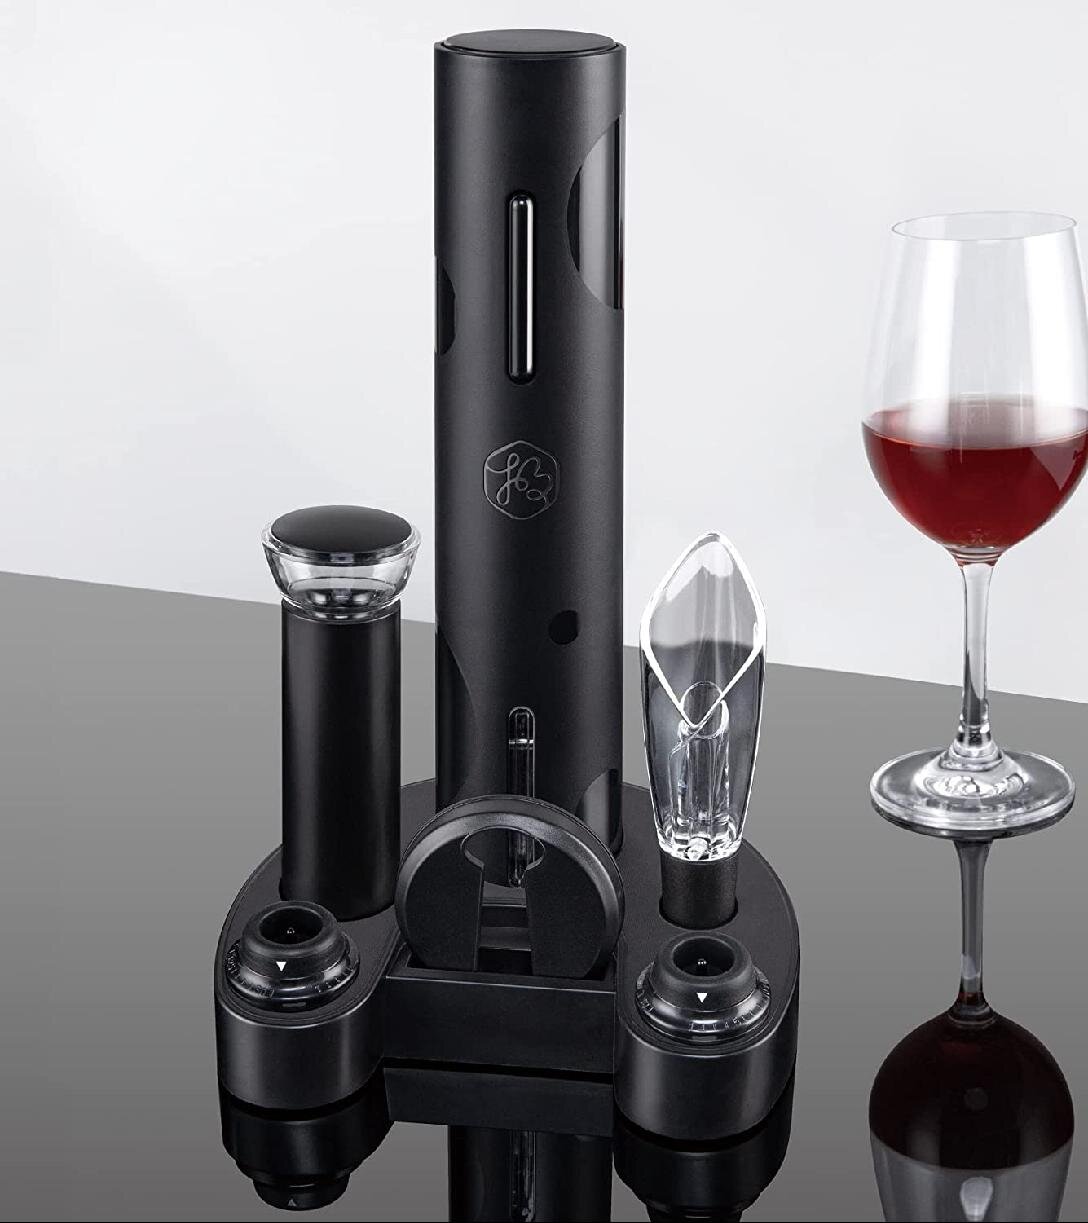 Charging Base Wine Aerator Pourer 5 in 1 Automatic Electric Wine Opener with Wine Accessories Corkscrew Opener with Foil Cutter Electric Wine Bottle Opener Vacuum Stopper Wine Set for Christmas